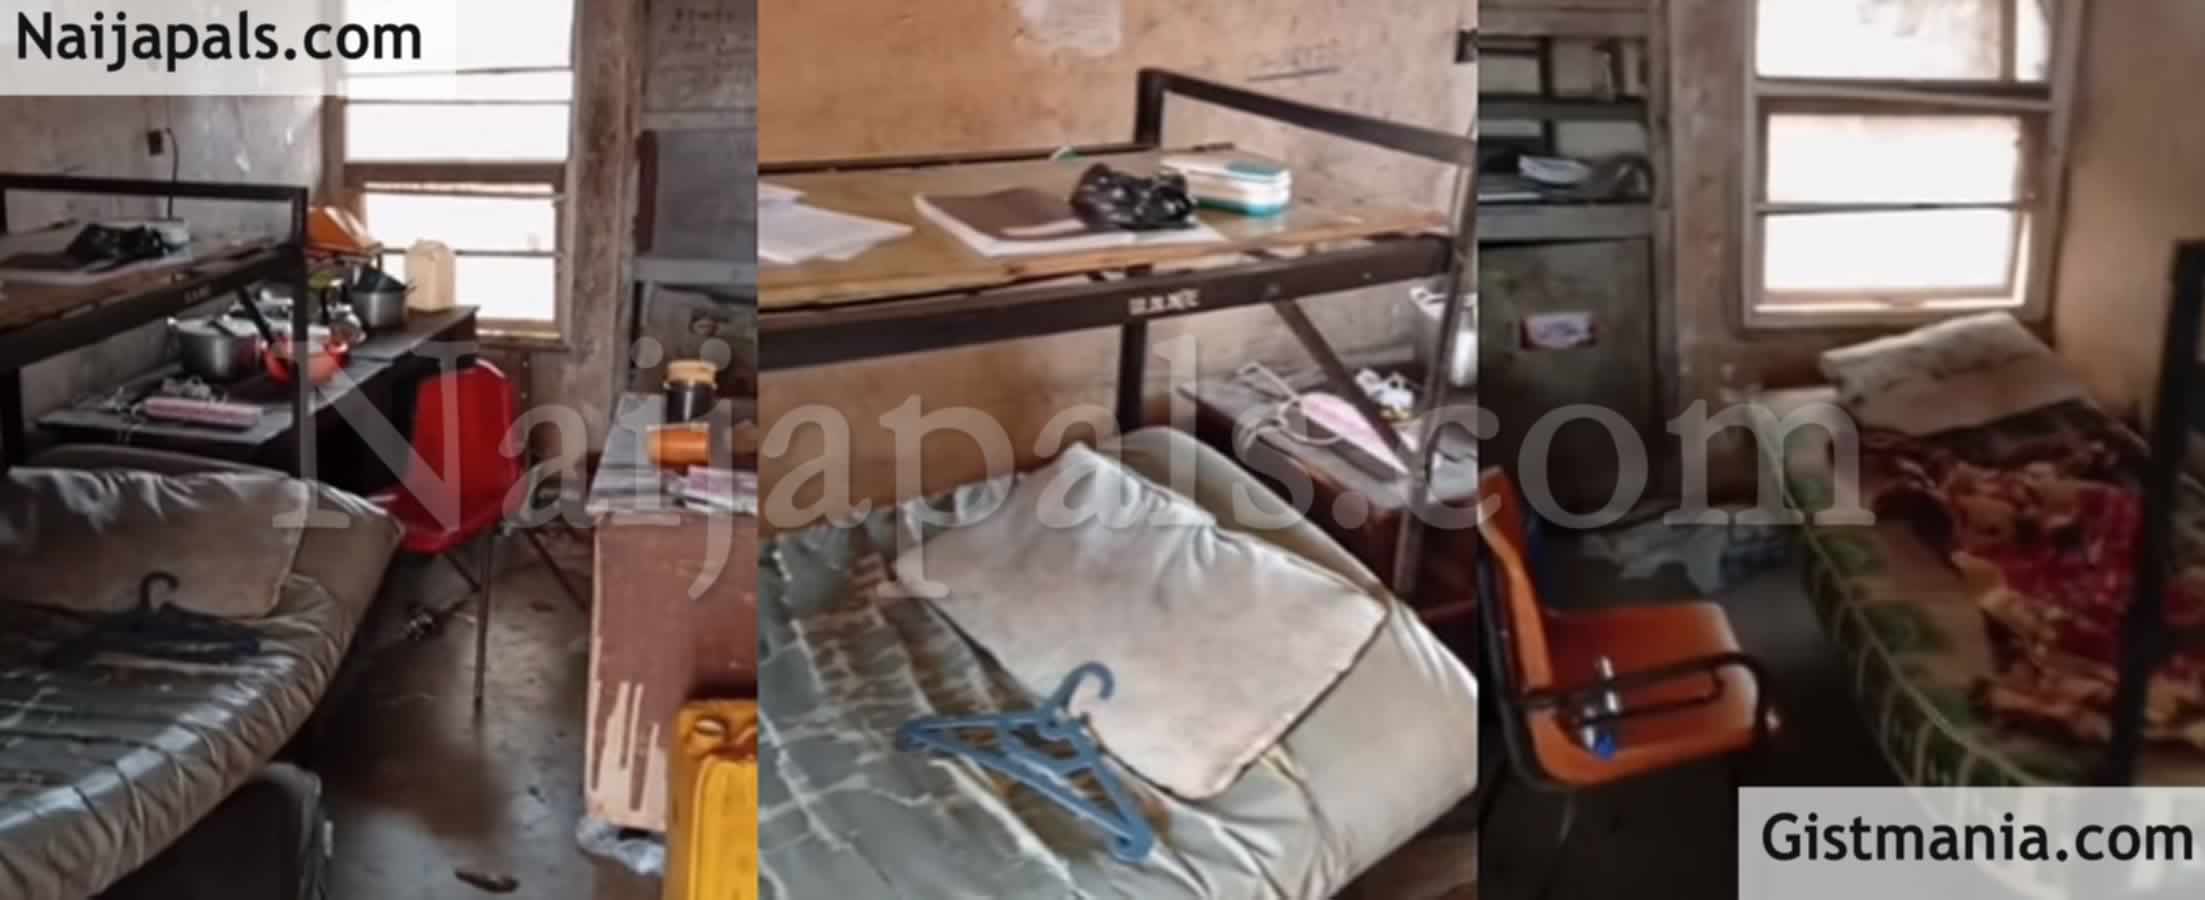 VIDEO: Man Shares The Disgusting State of a Hostel Room in University of Nigeria Nsukka